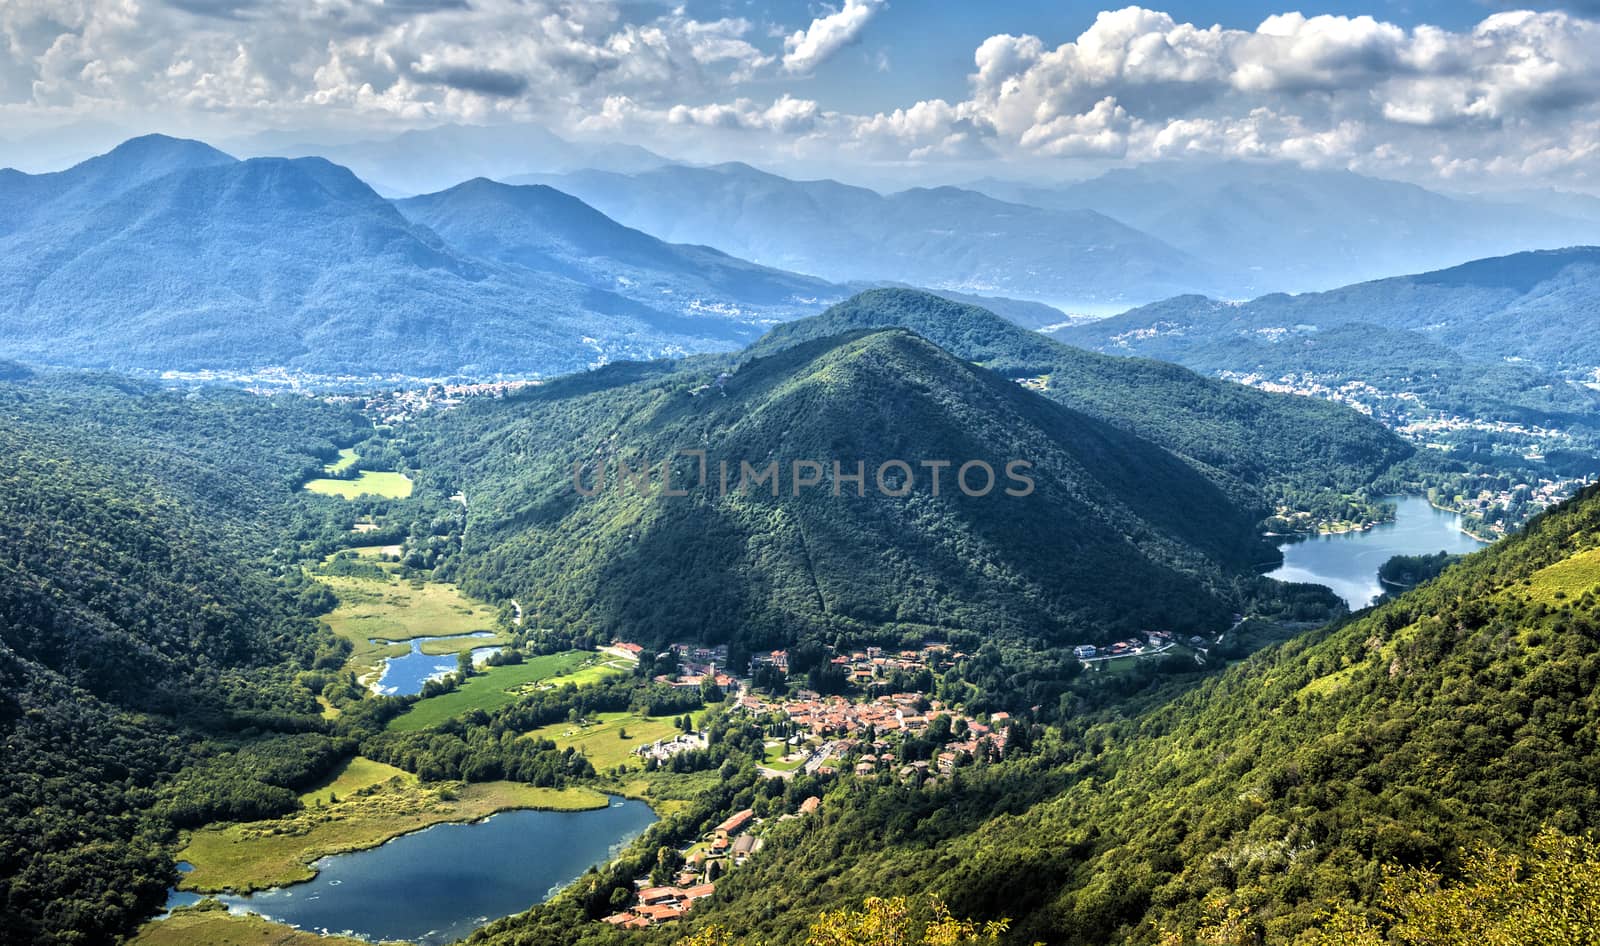 Views of the Alpine foothills of Varese by Mdc1970